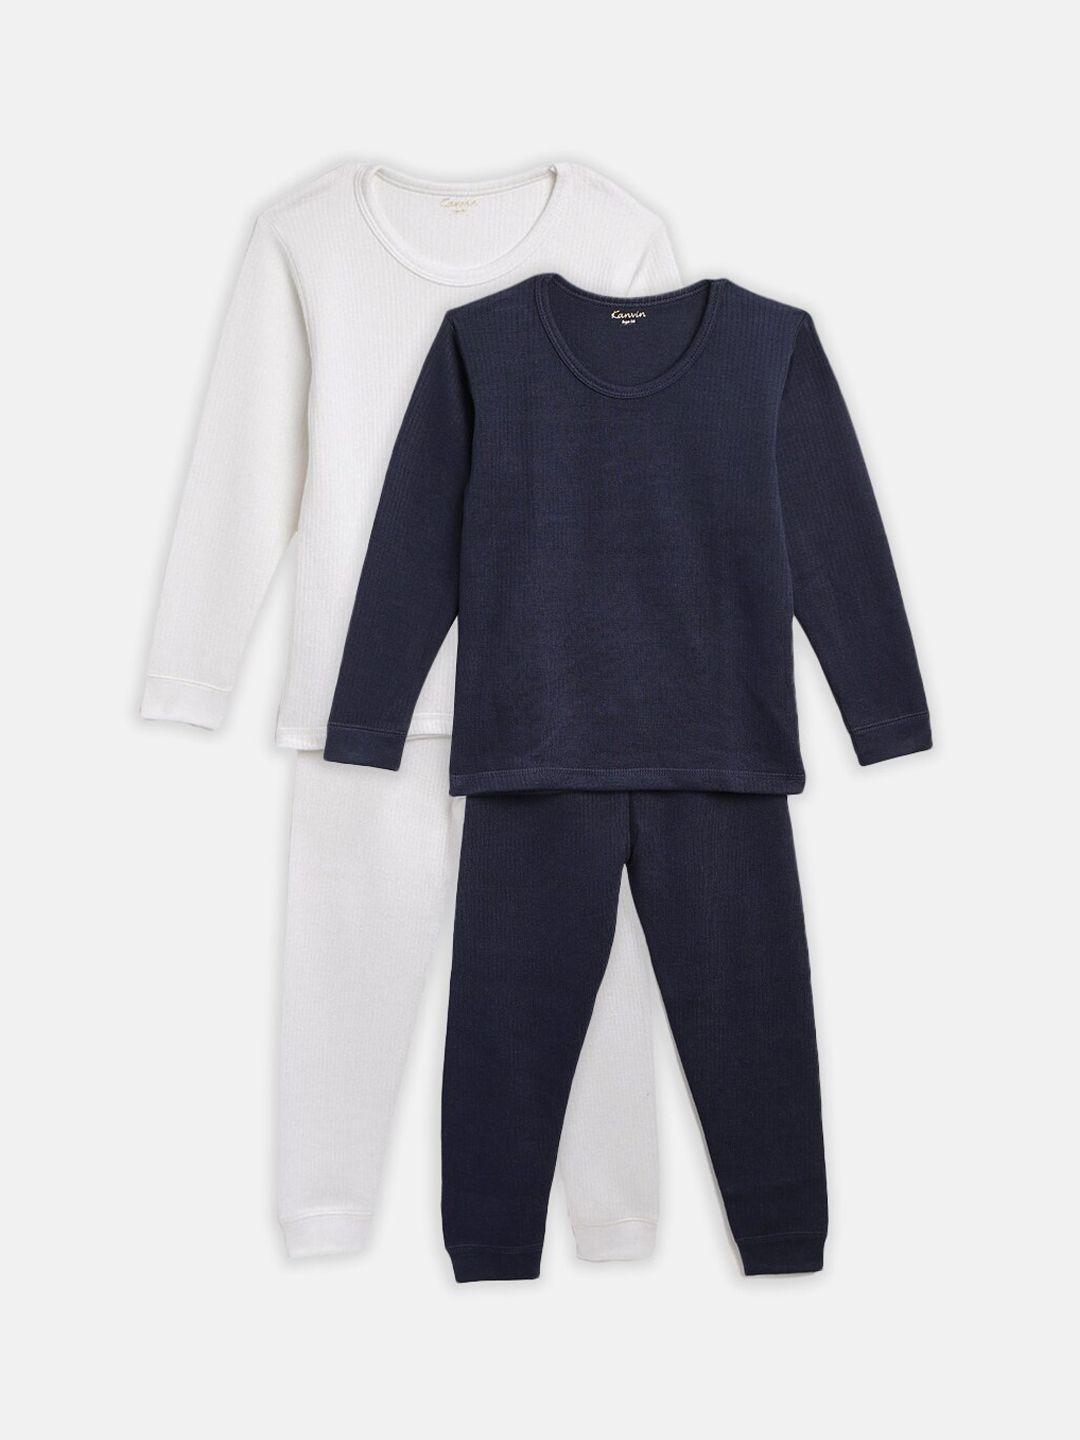 kanvin-boys-pack-of-2-navy-blue-&-white-solid-thermal-sets